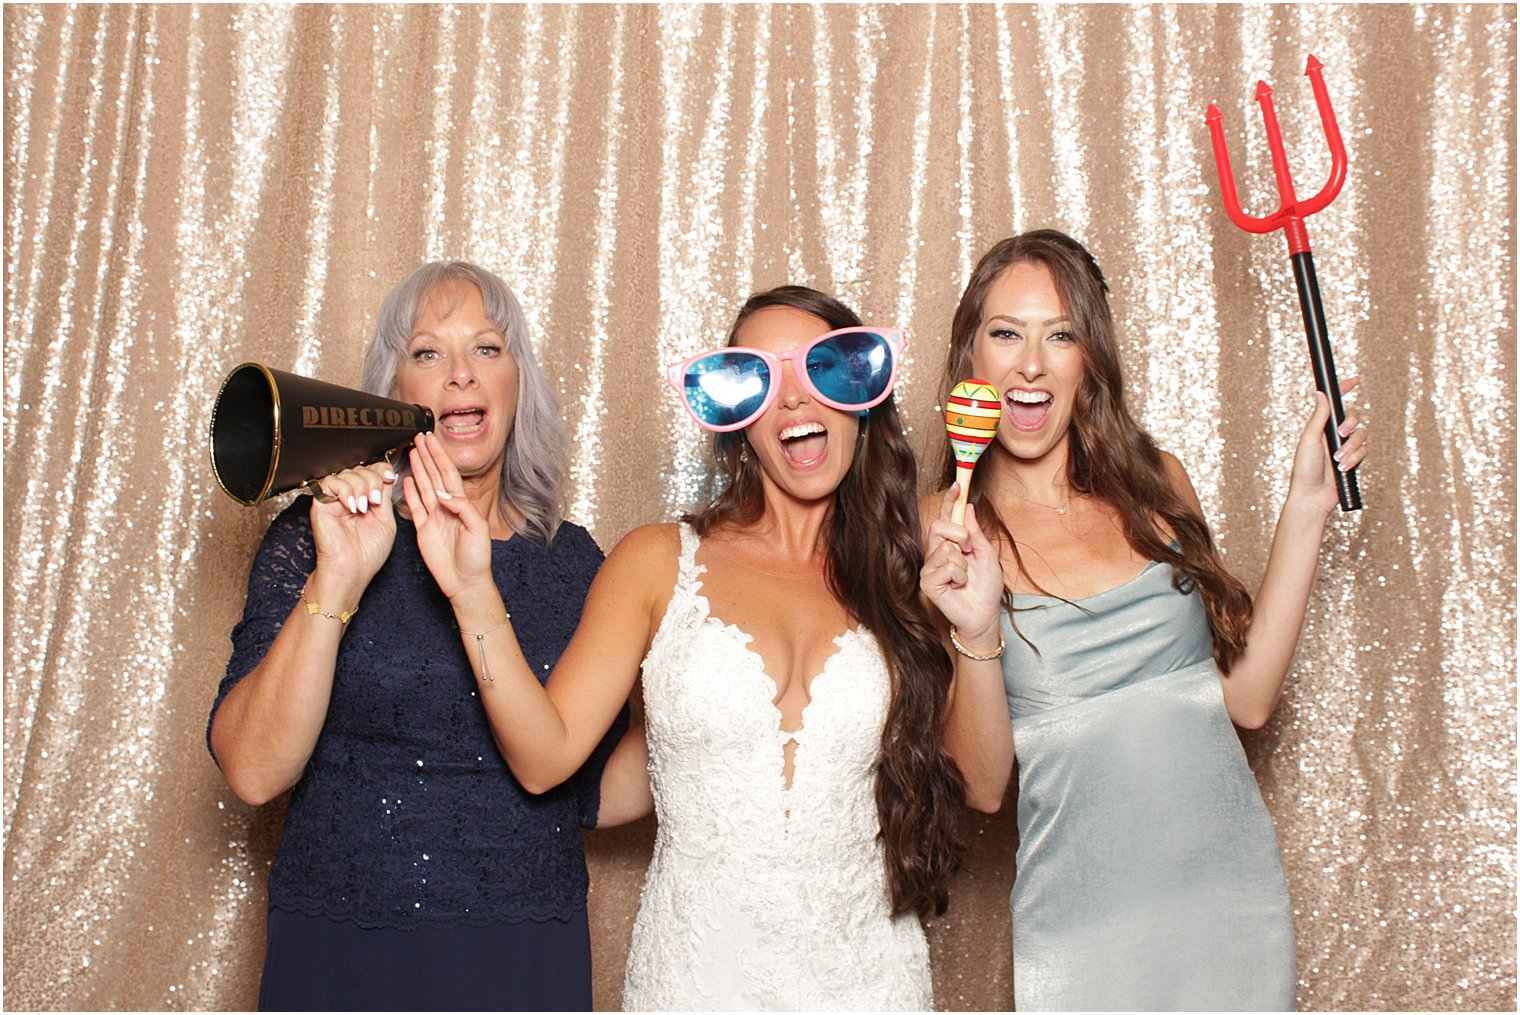 bride plays in photo booth with bridesmaid and mom